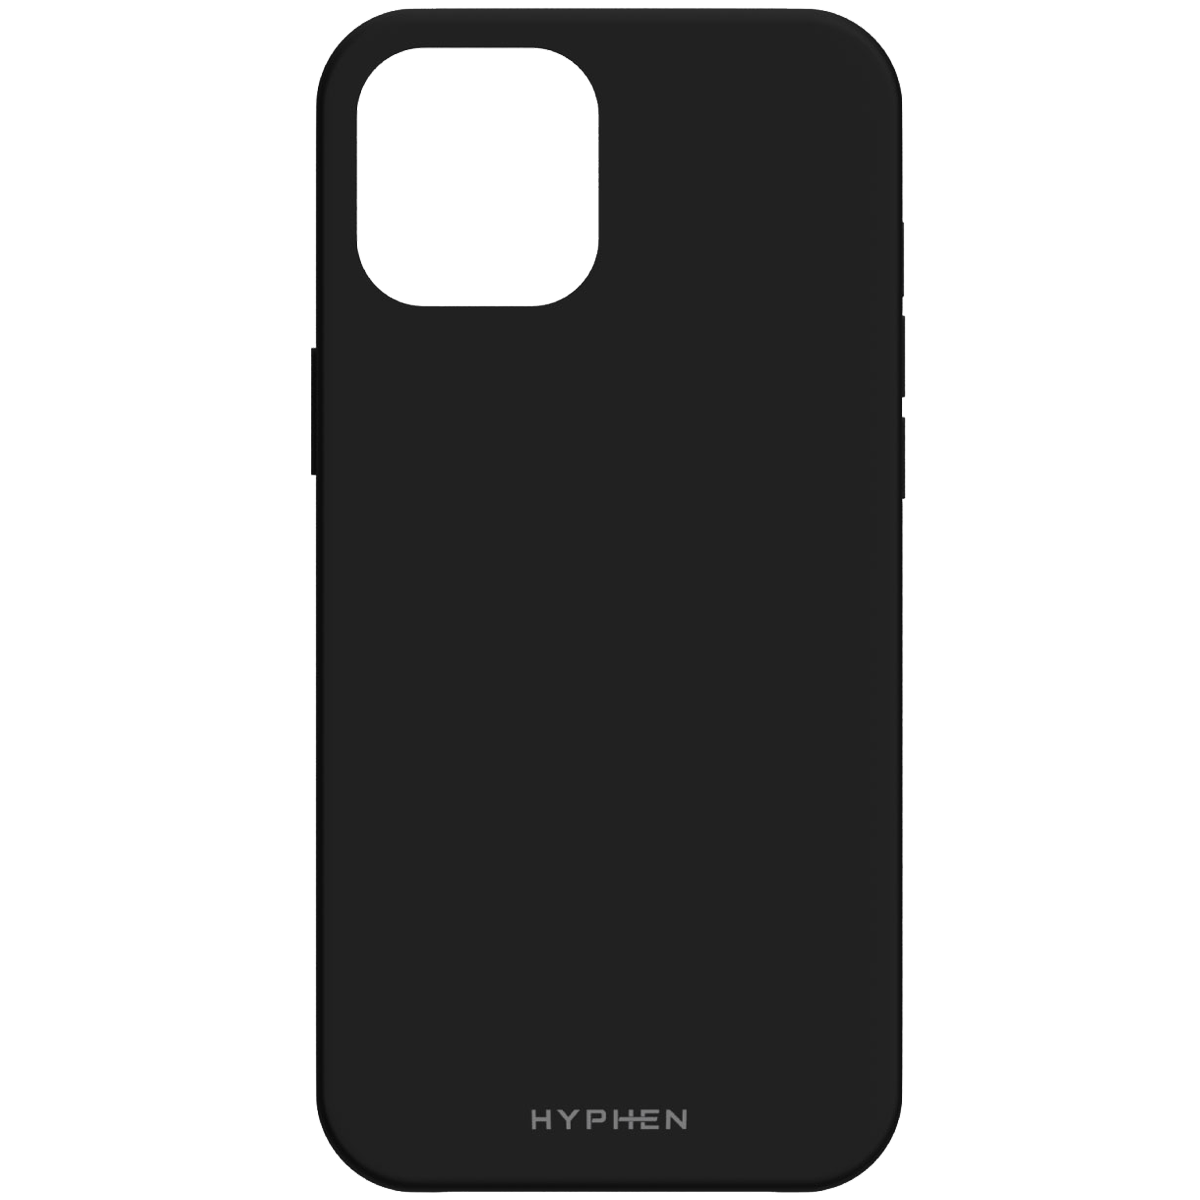 Hyphen Tint Silicone Back Case For iPhone 12 Pro Max (Compact and Flexible, HPC-SXII670060, Black)_1